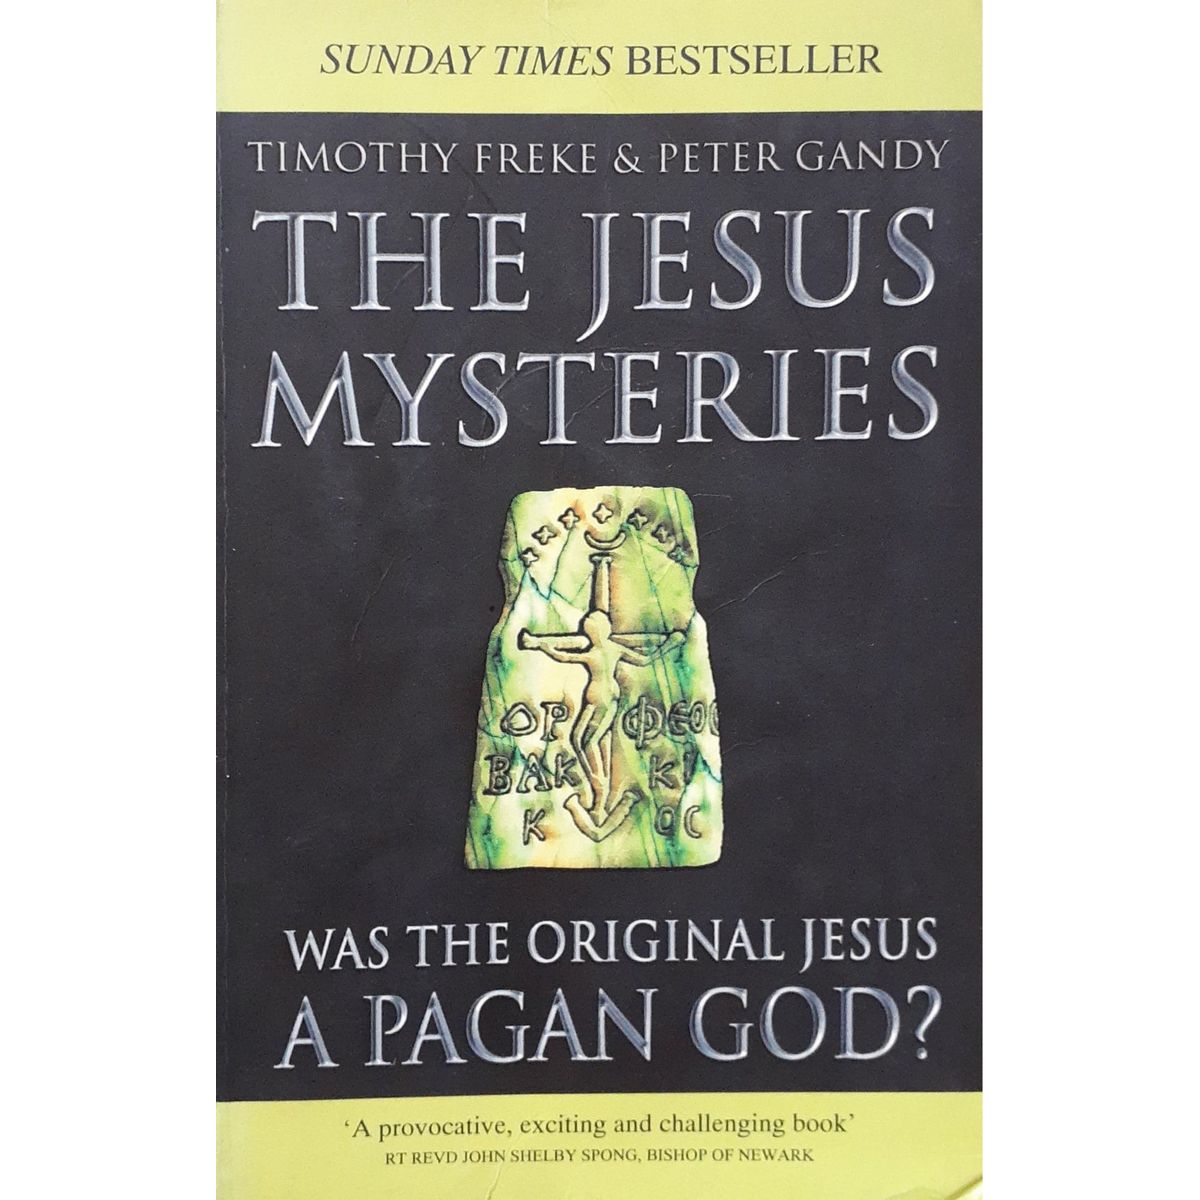 ISBN: 9780722536773 / 0722536771 - The Jesus Mysteries: Was the Original Jesus a Pagan God? by Timothy Freke & Peter Gandy [2000]